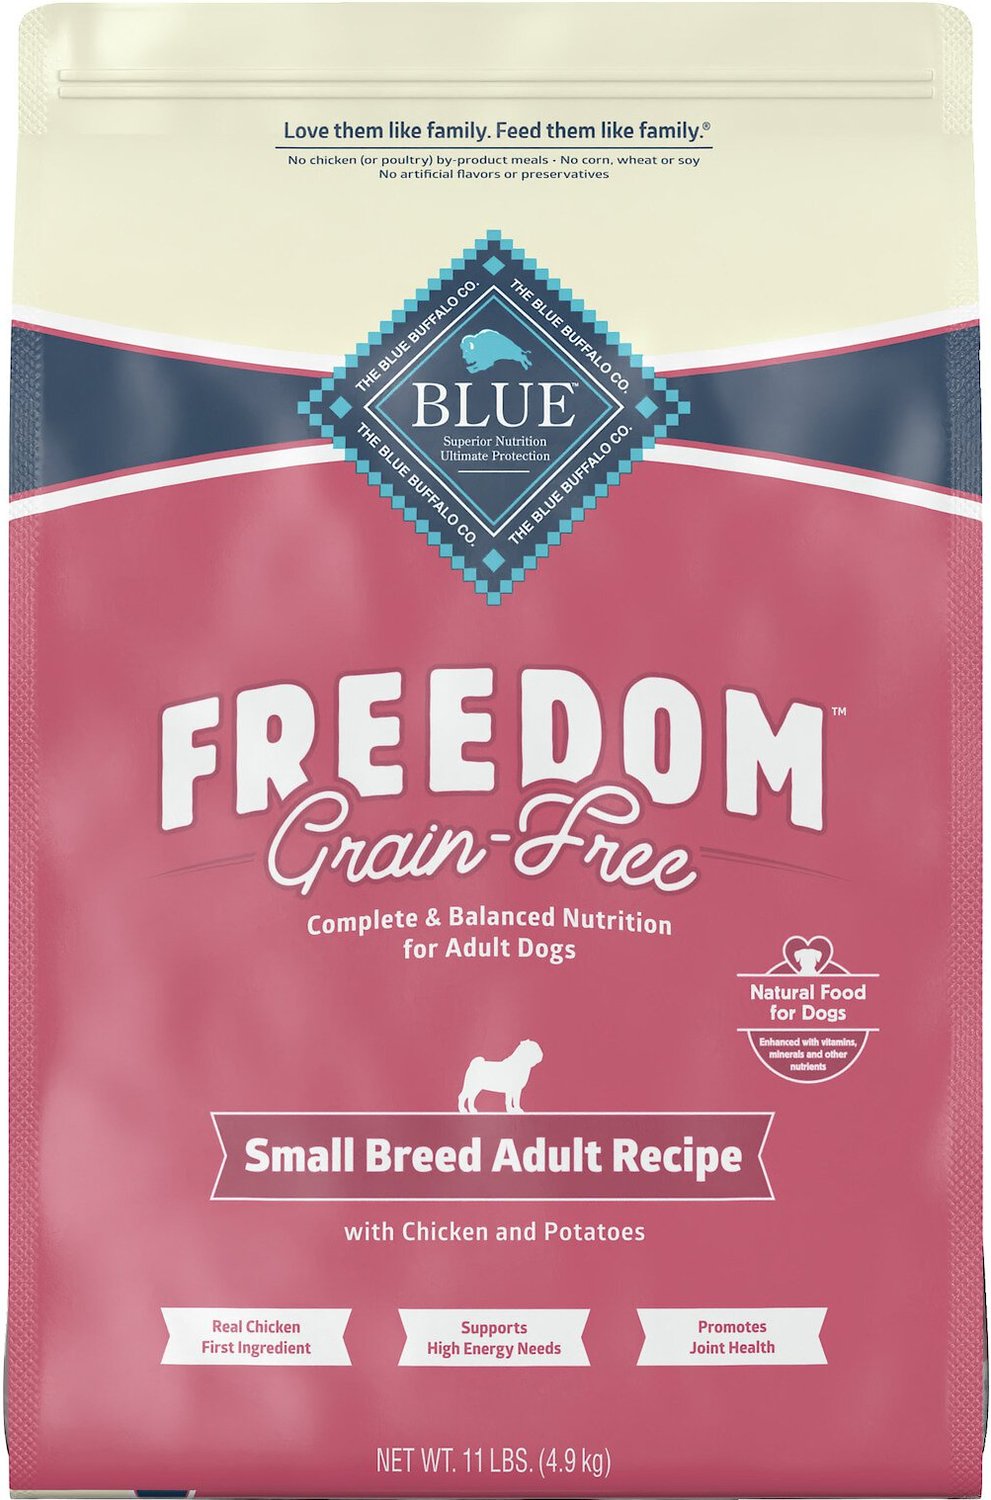 chewy small breed dog food